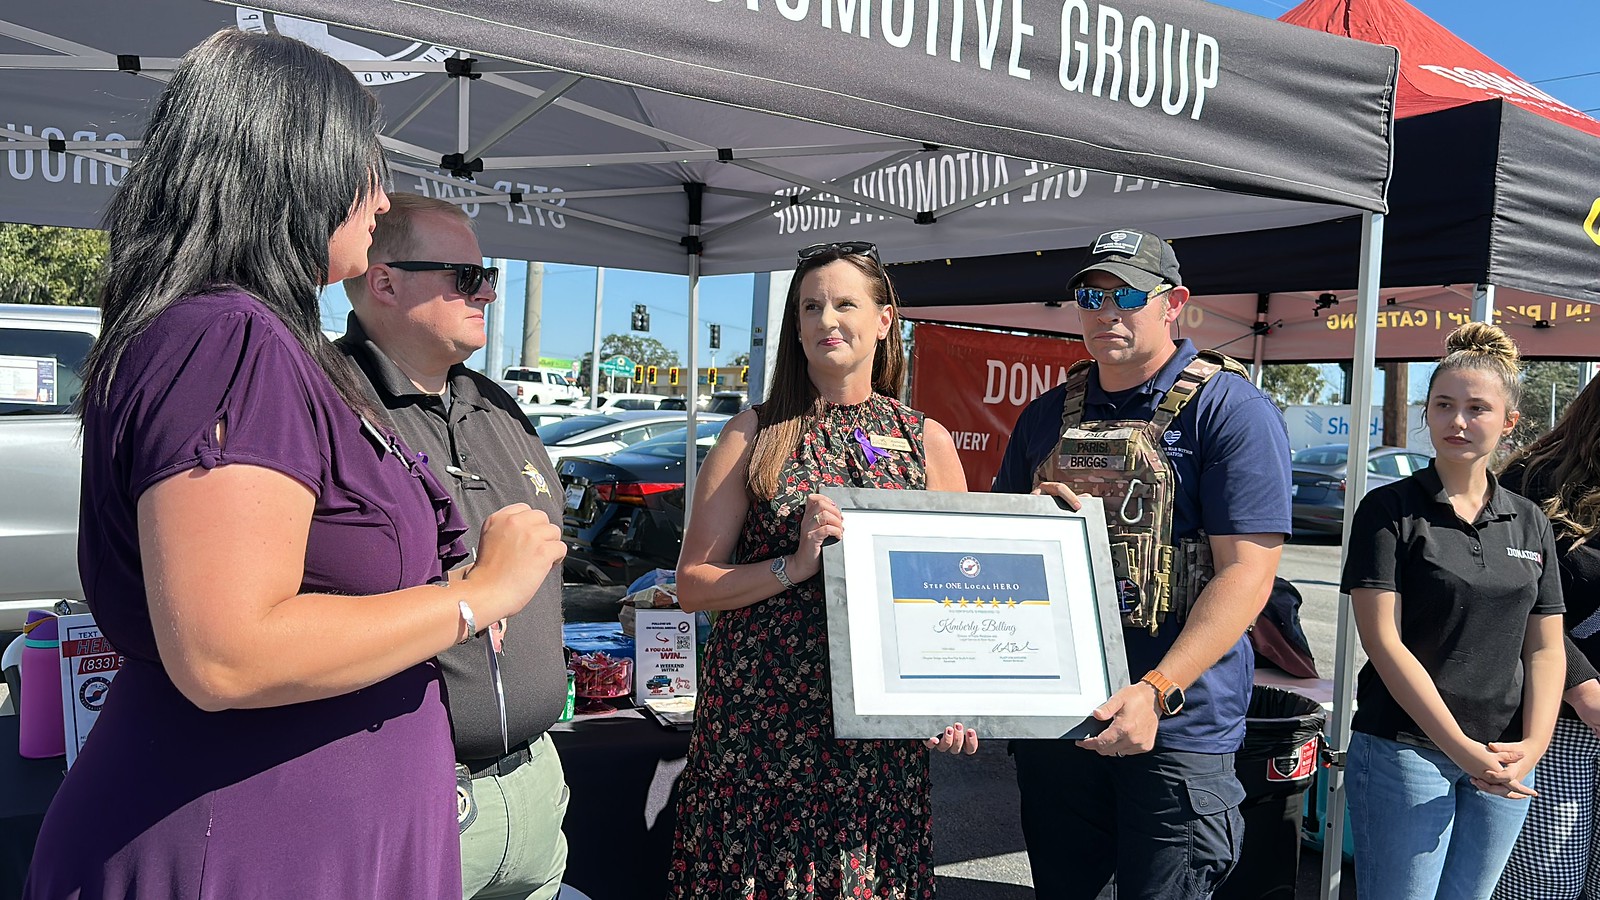 Step One Auto Presents Local Hero Award to Safe Haven’s Kimberly Billings